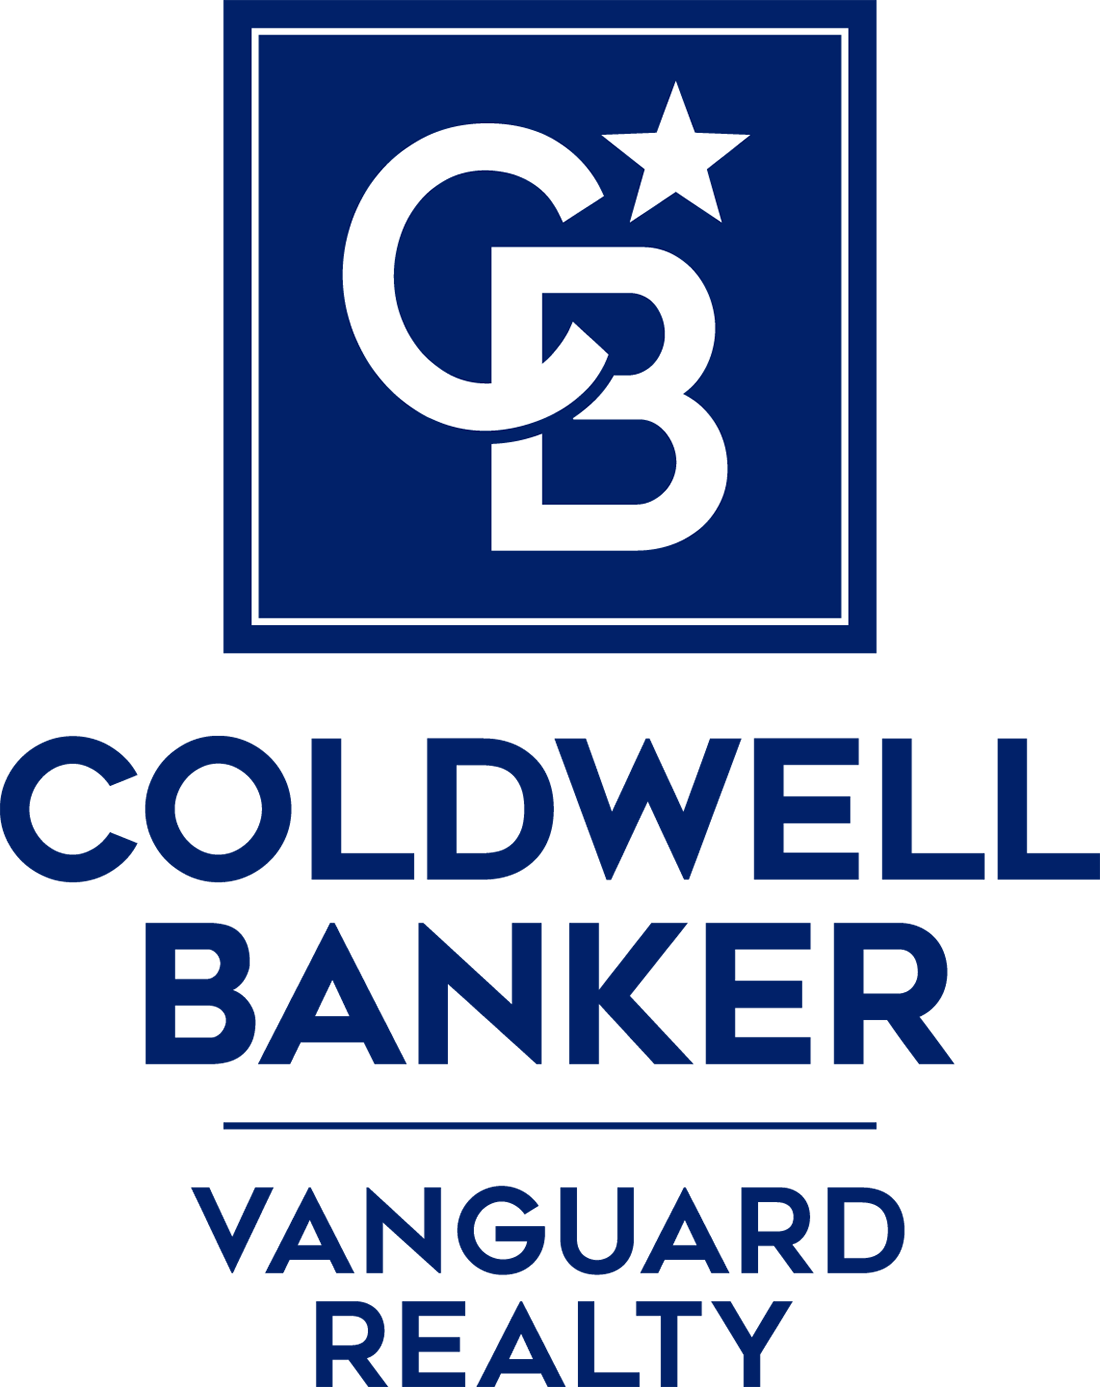 Coldwell Banker Vanguard Realty